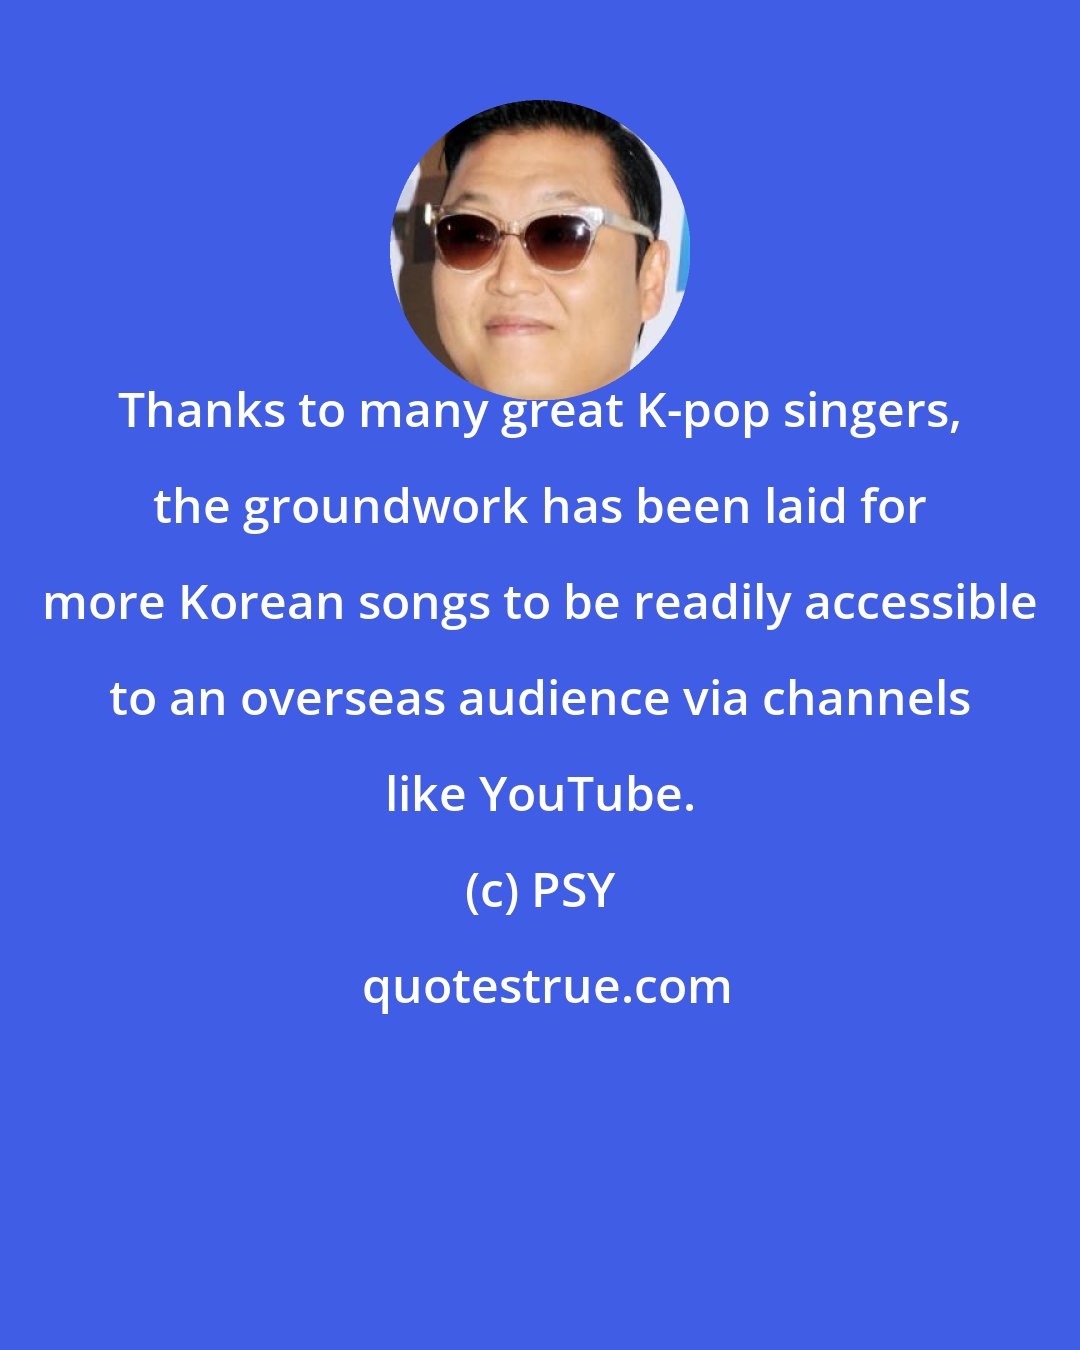 PSY: Thanks to many great K-pop singers, the groundwork has been laid for more Korean songs to be readily accessible to an overseas audience via channels like YouTube.